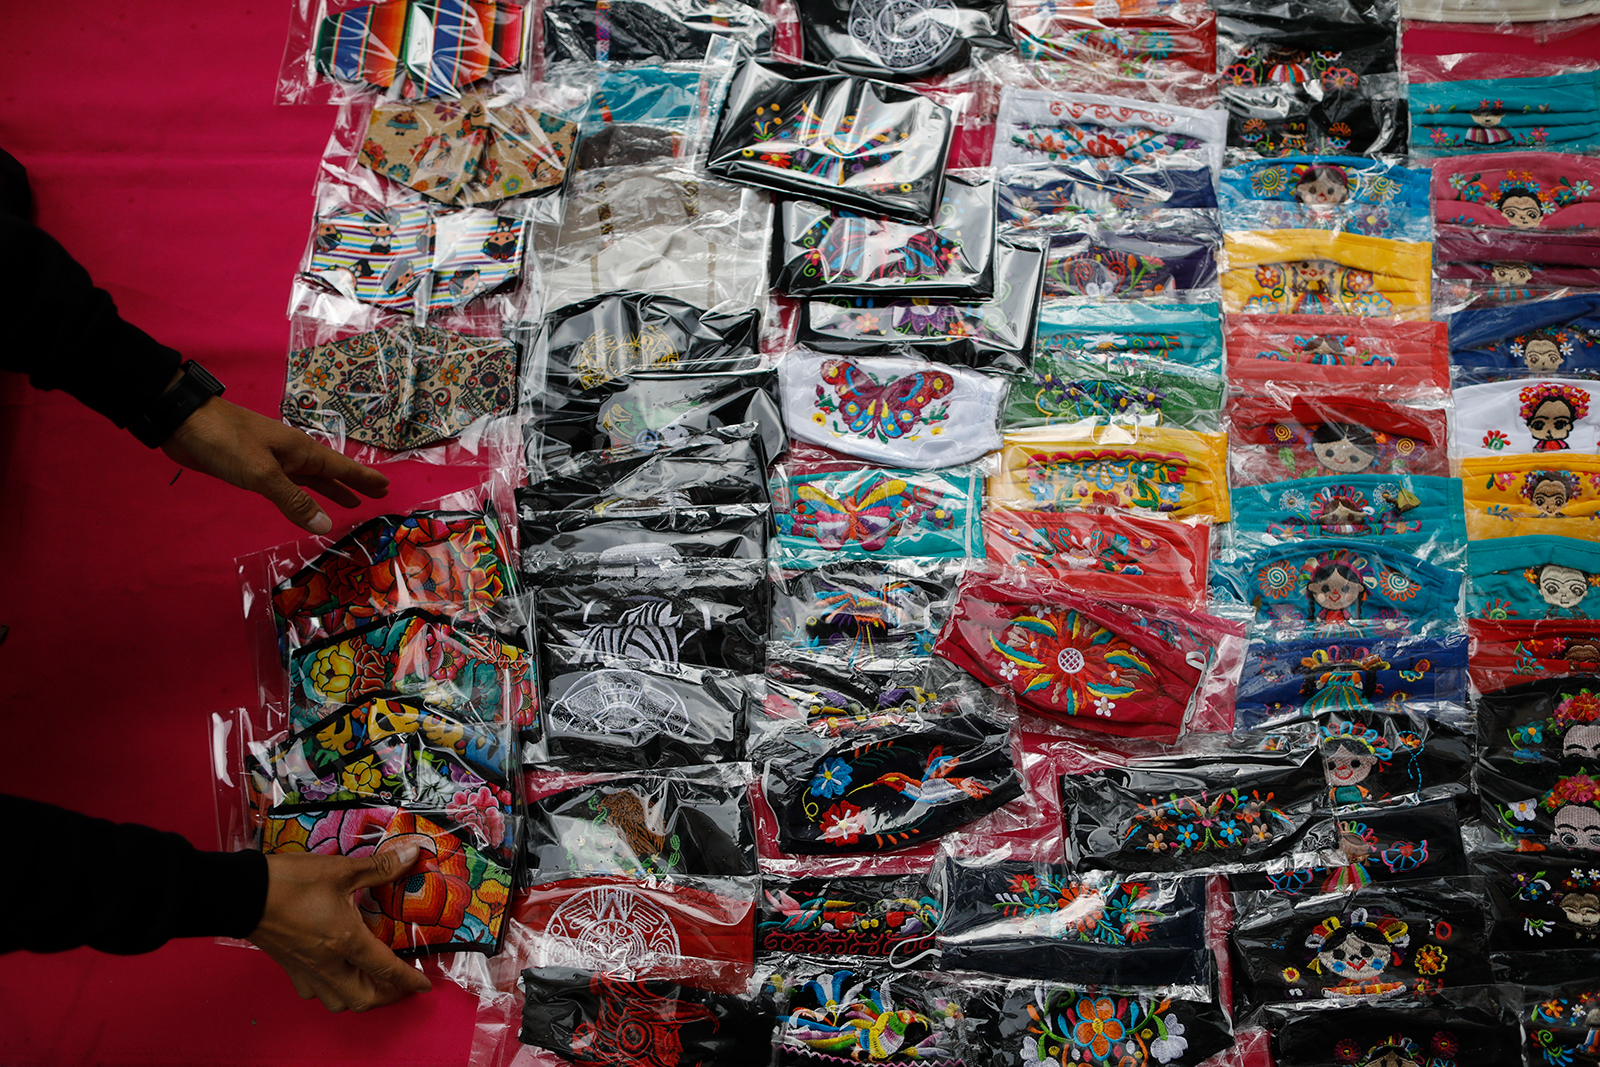 Face masks are laid out for sale in Mexico City, on Monday, August 17.